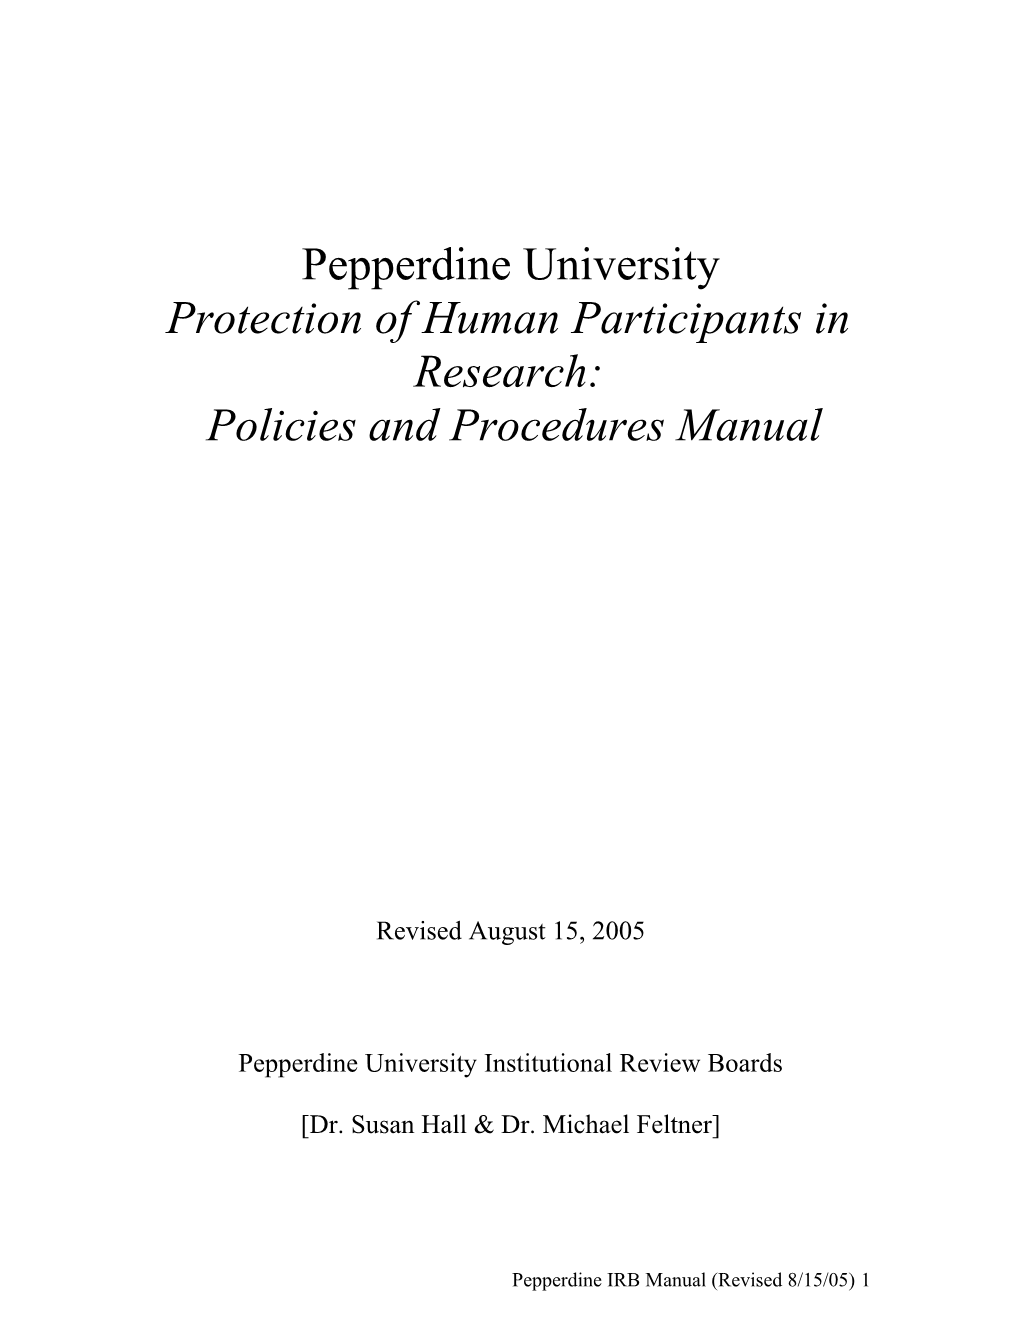 Human Participants in Research Manual